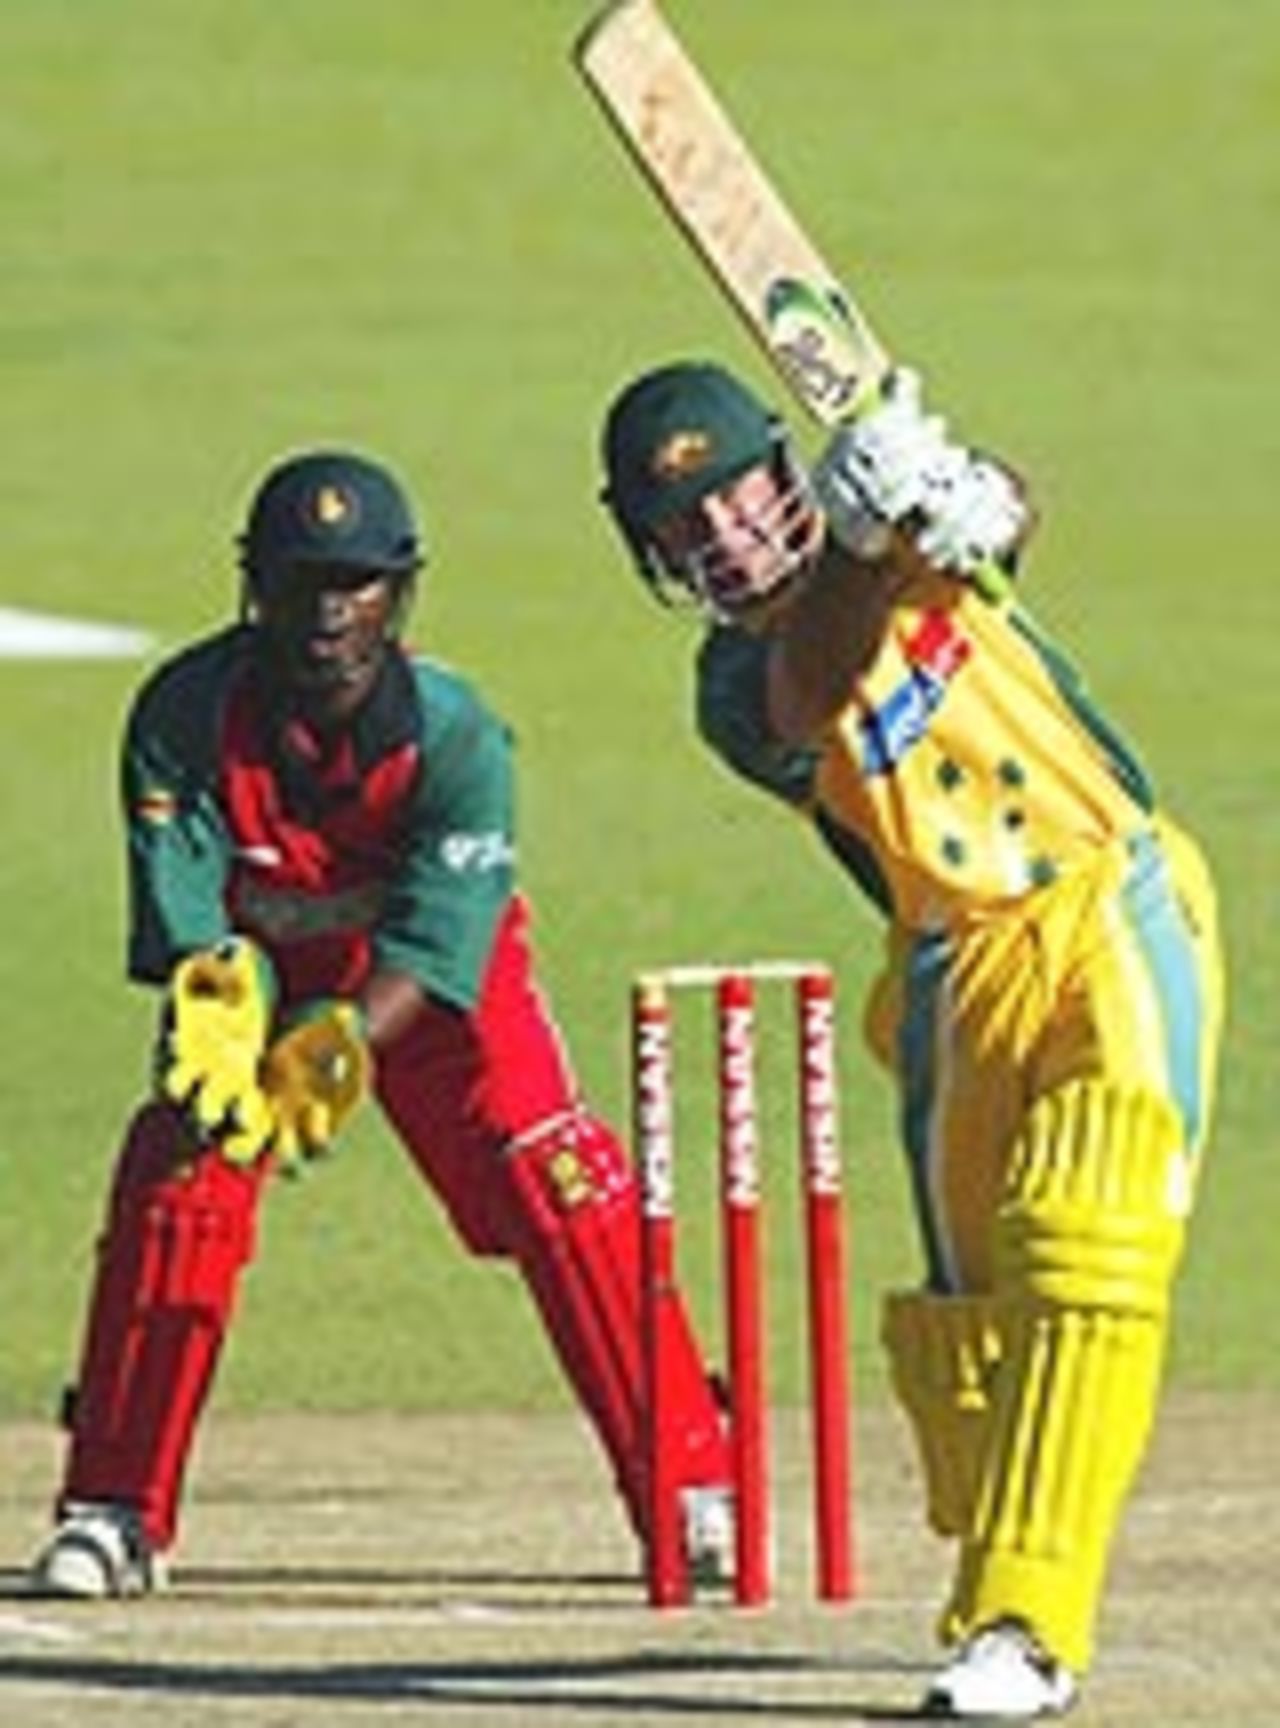 Ricky Ponting drives during his innings of 91, in the first one-day international against Zimbabwe at Harare, May 25, 2004